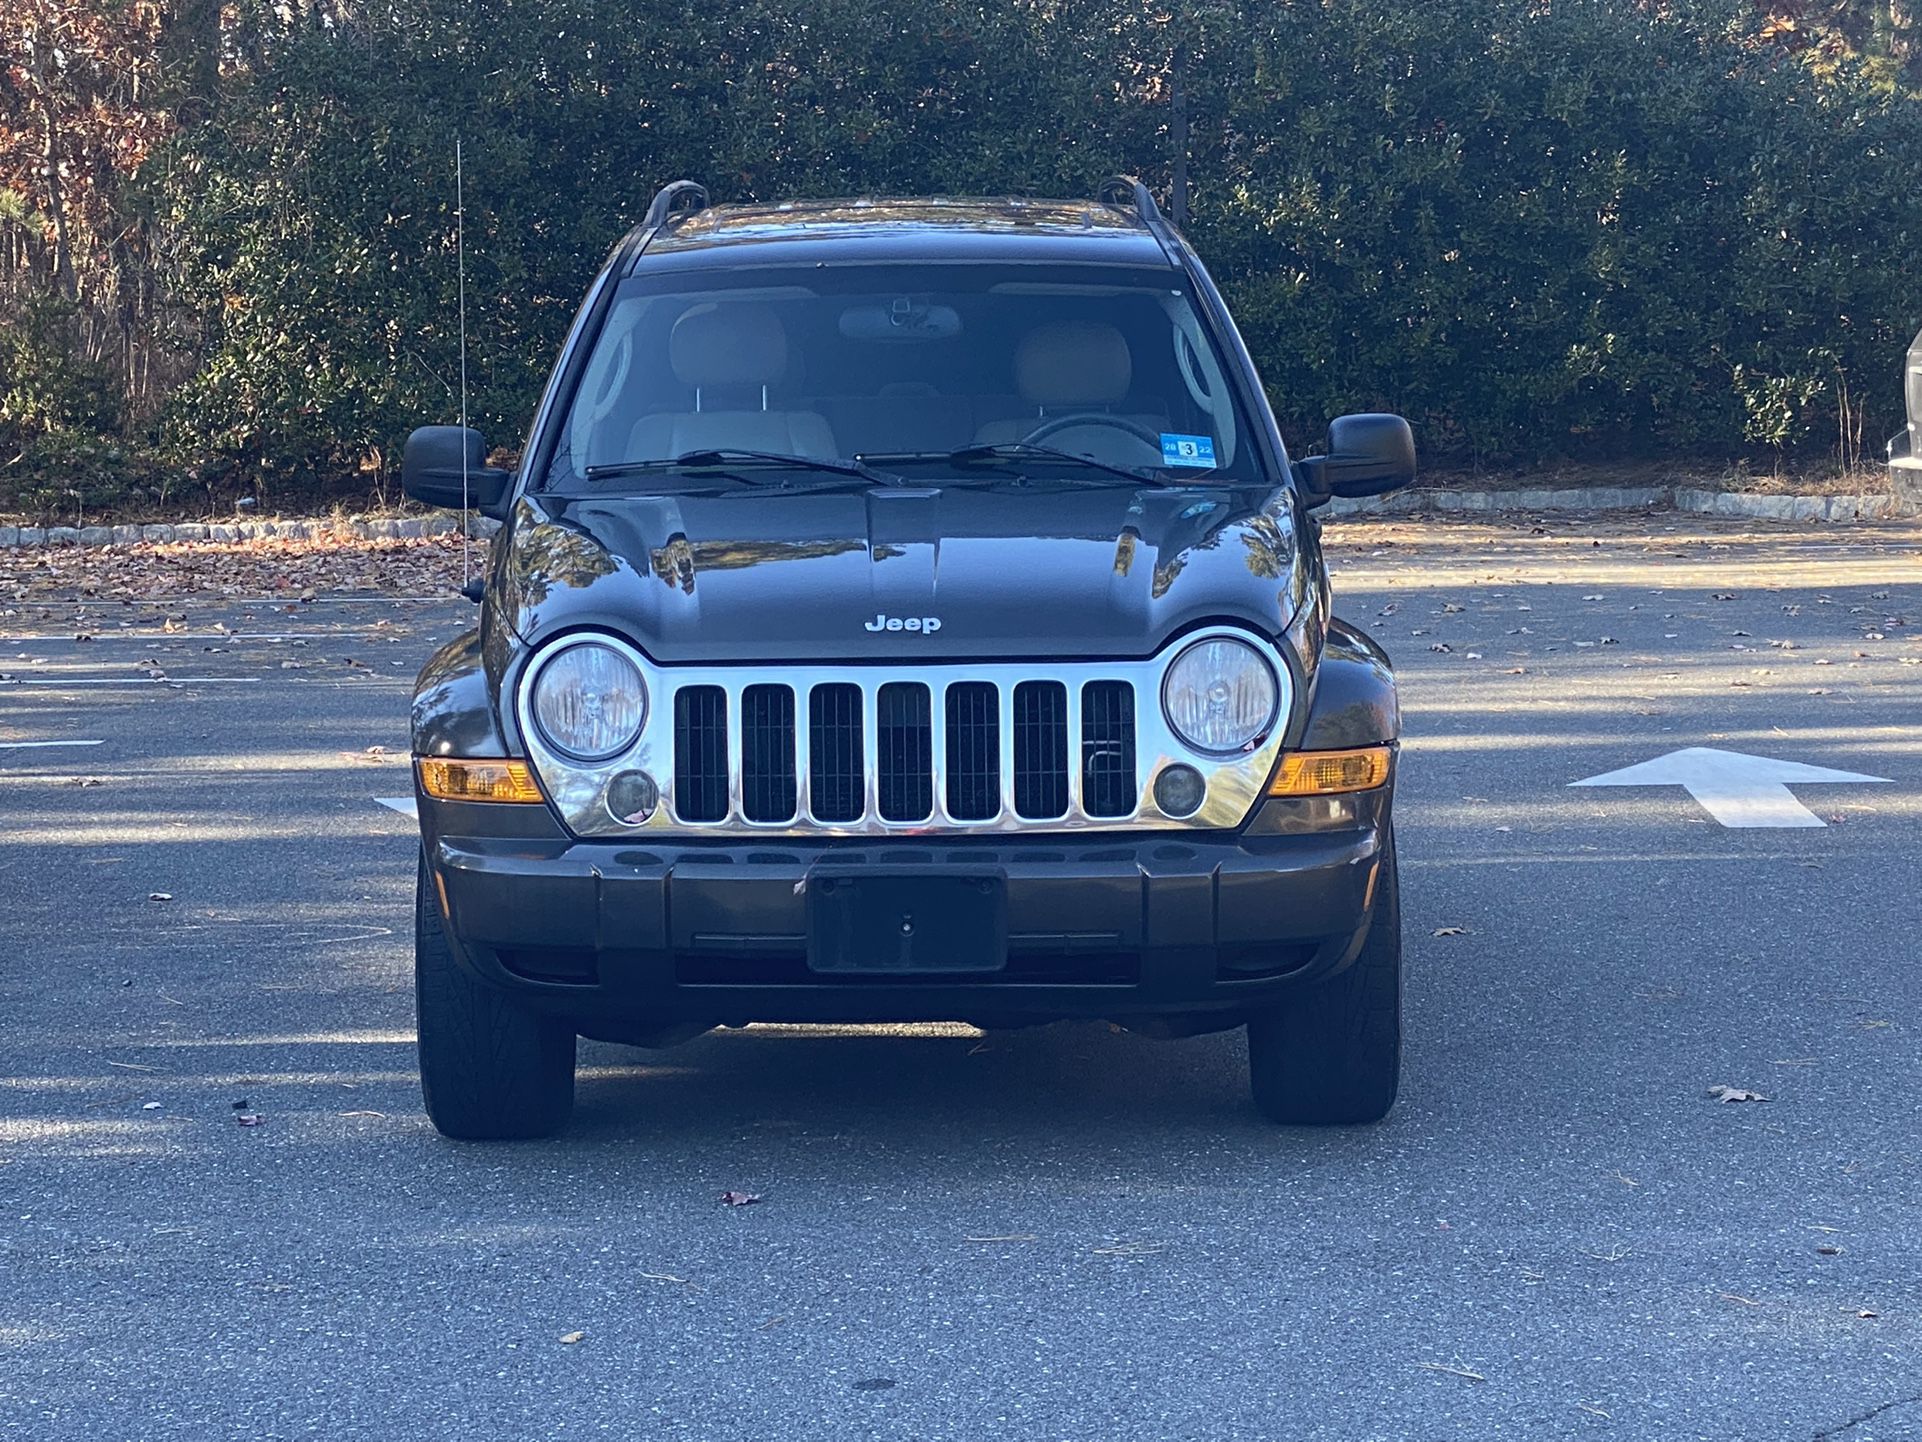 2006 Jeep Liberty Limited / fully loaded / 4x4  Has 150k  Runs and drives excellent / clean title / no issues  $5300